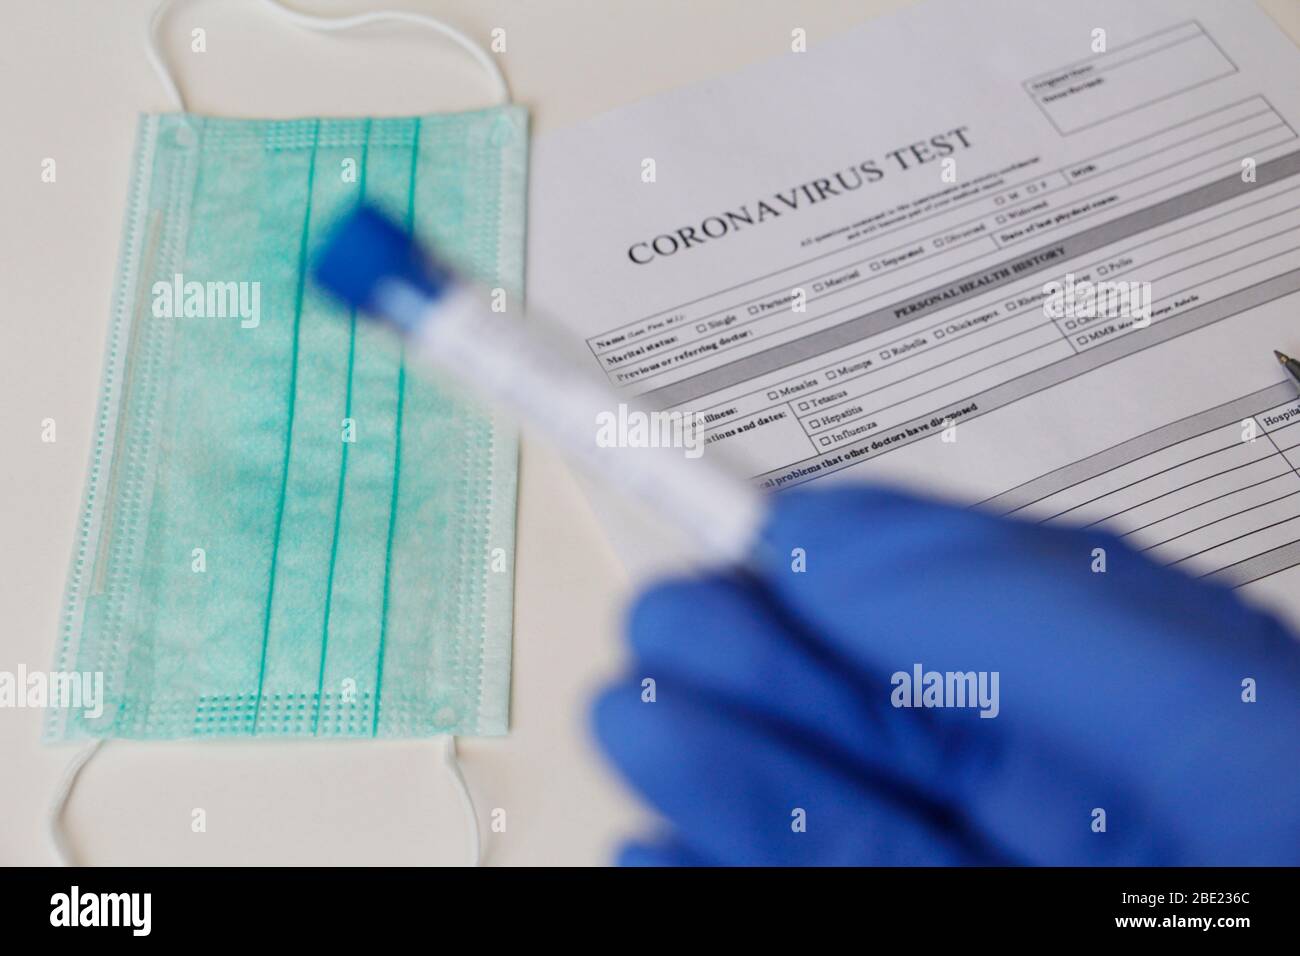 Laboratory test for determination of Coronavirus. Concept. The doctor holds a test tube for analysis. The test tube says POSITIVE and NEGATIVE. On the Stock Photo